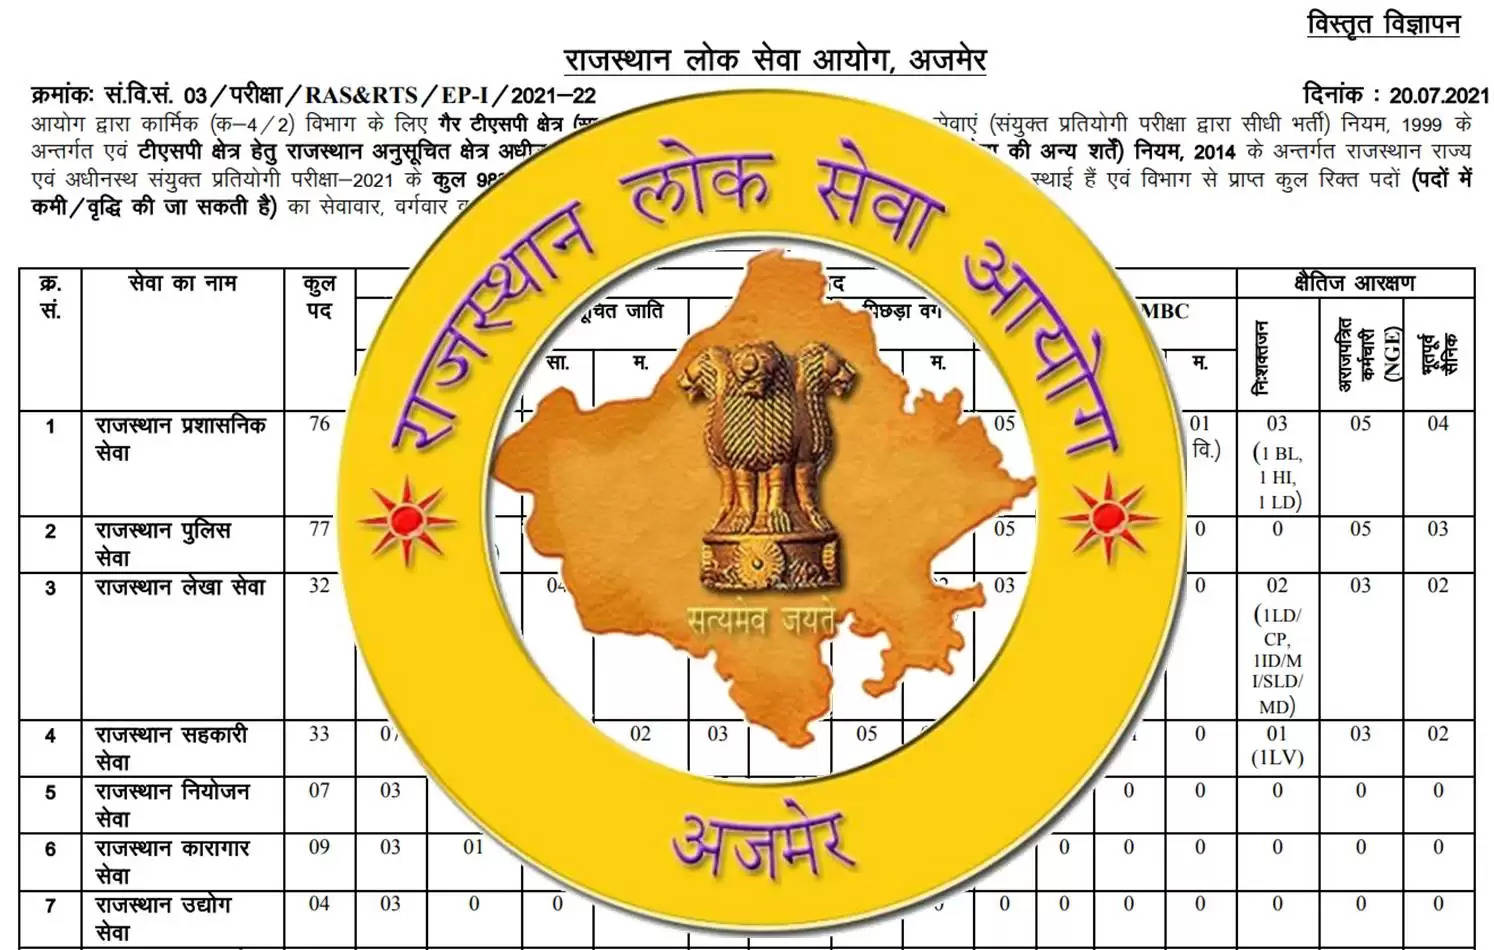 RPSC RAS examination online application how to apply for RPSC RAS combined examination udaipur